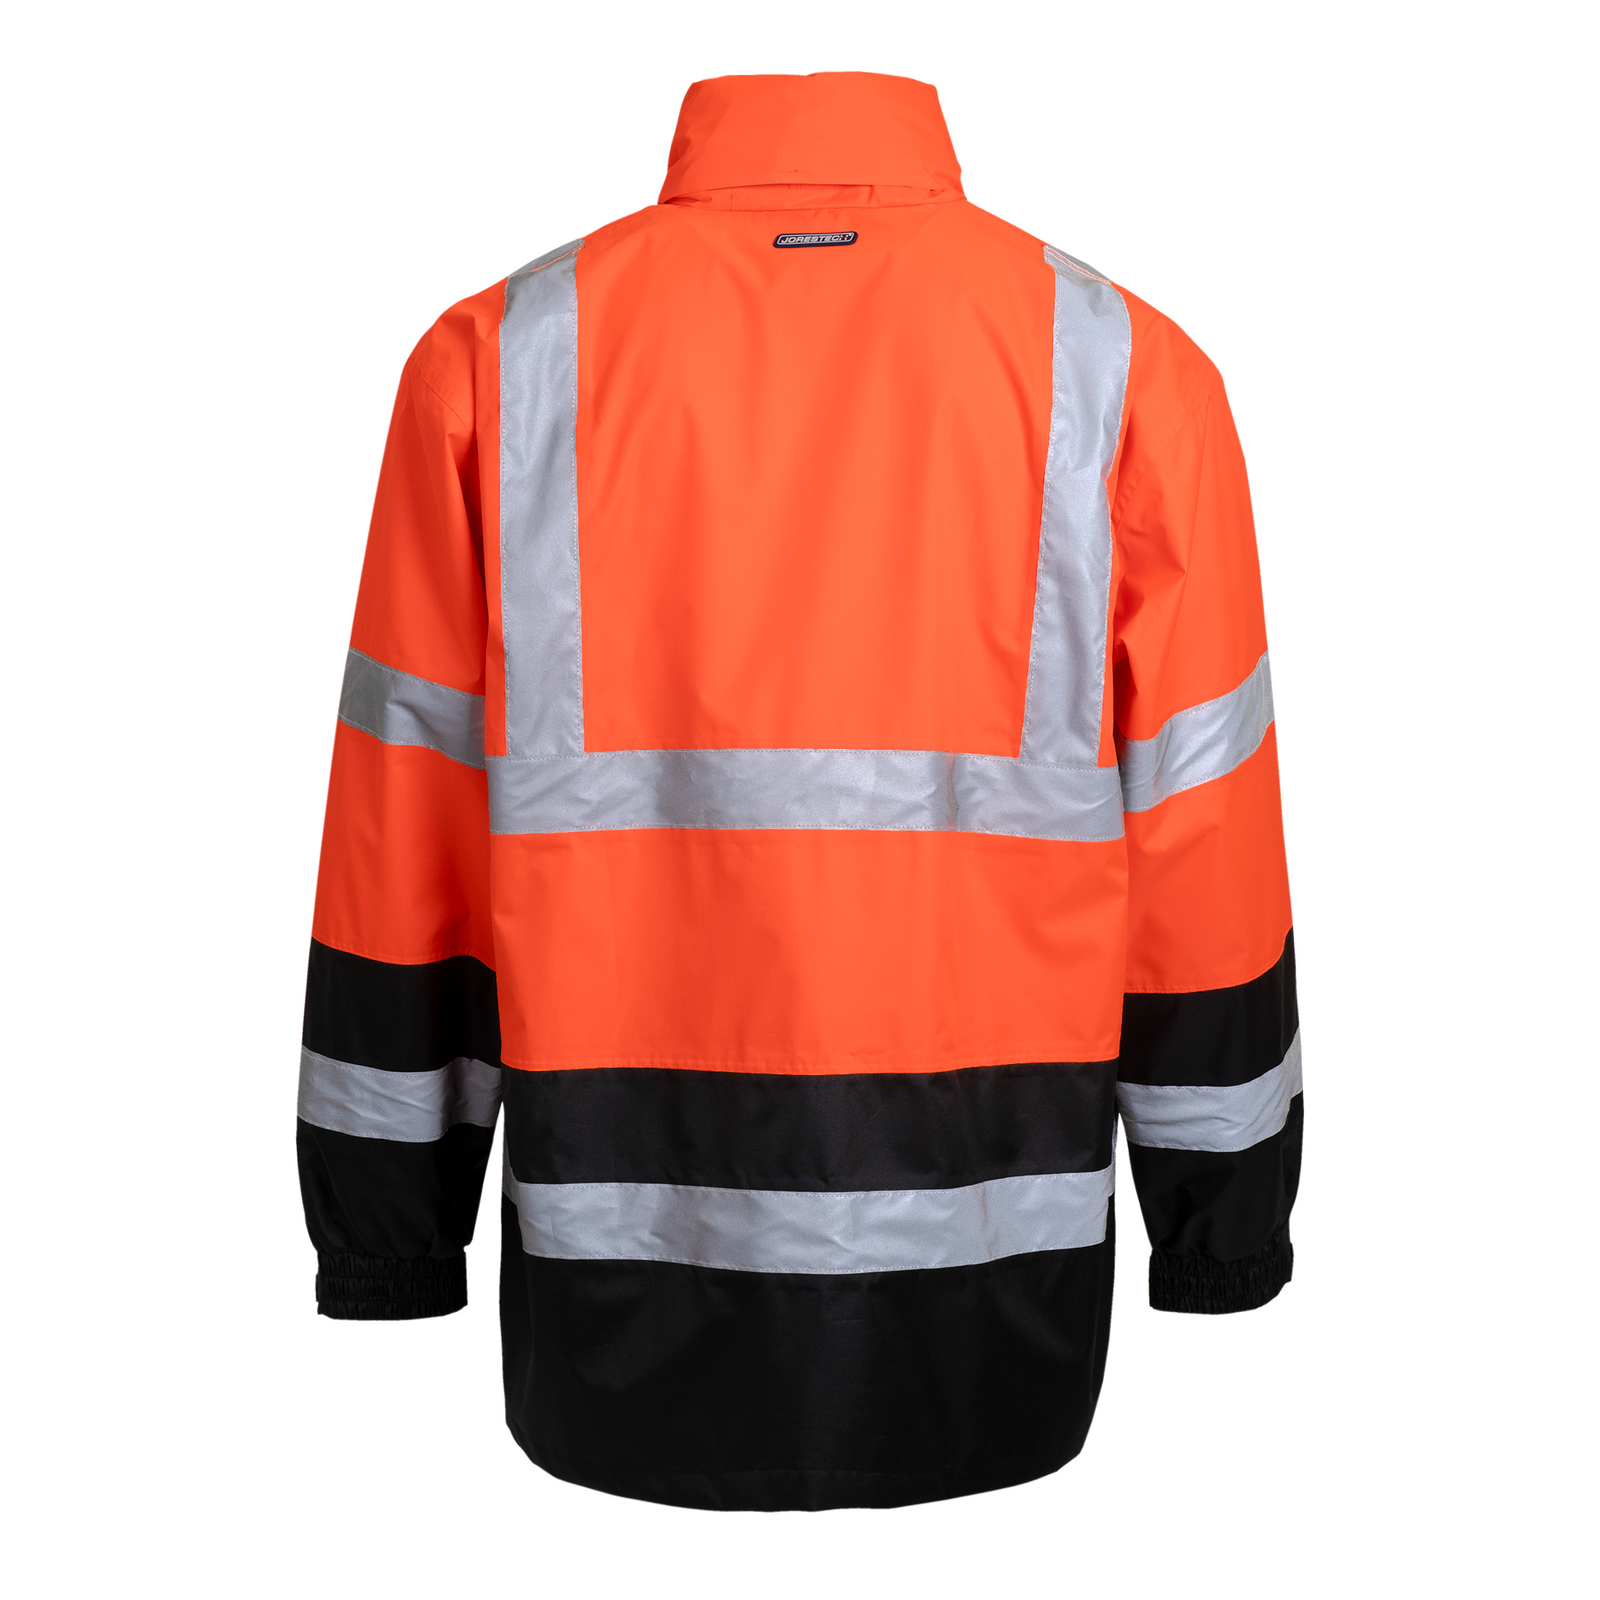 Back view of a JORESTECH High visibility orange and black rain jacket class 3 type R with 2 inches reflective strips